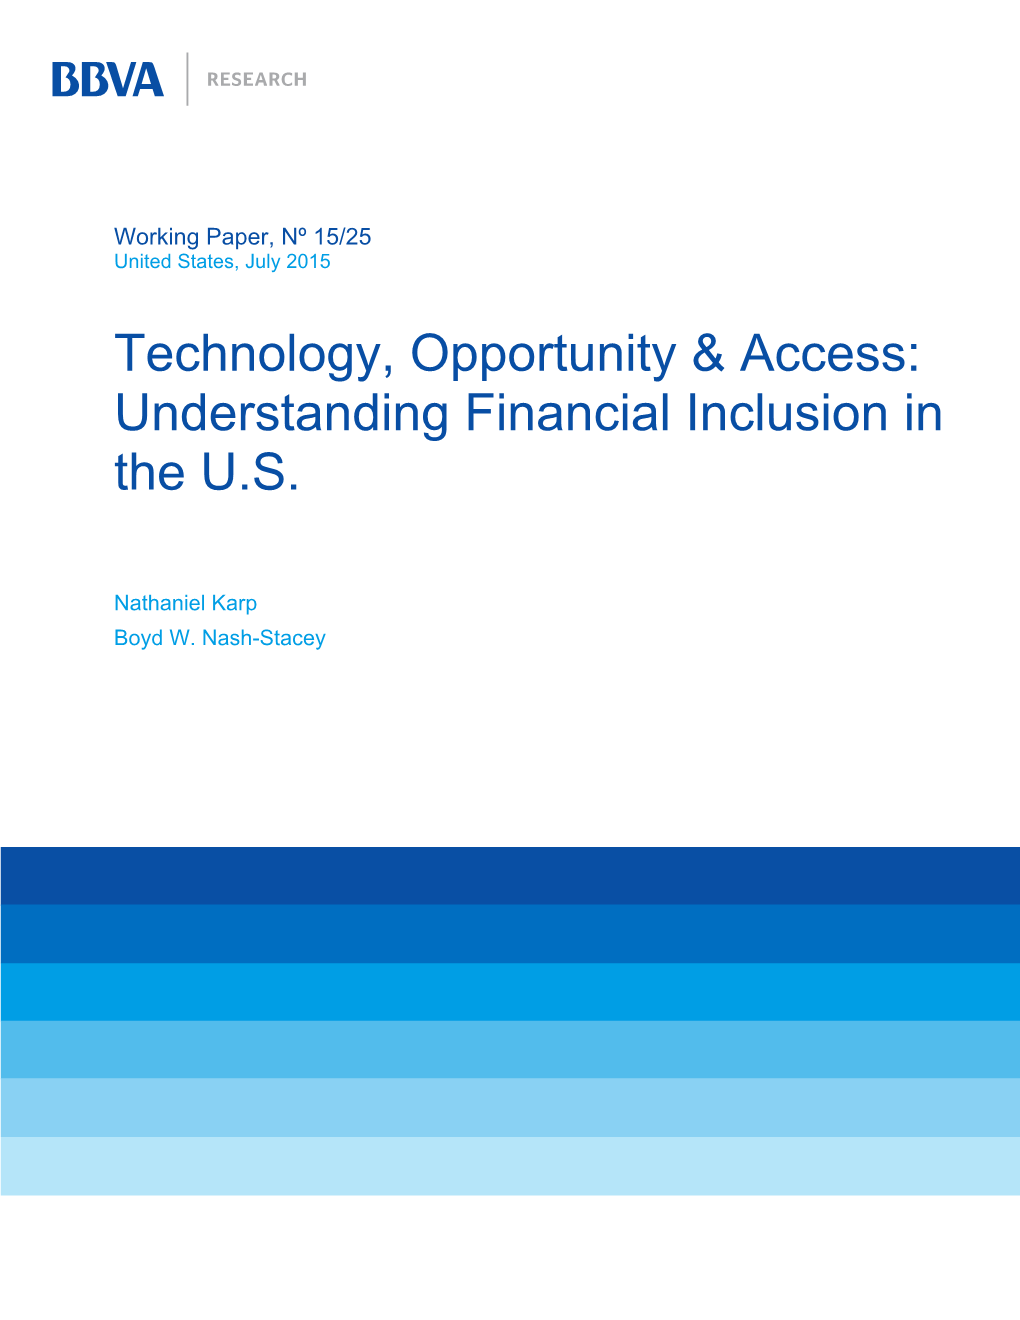 Understanding Financial Inclusion in the US